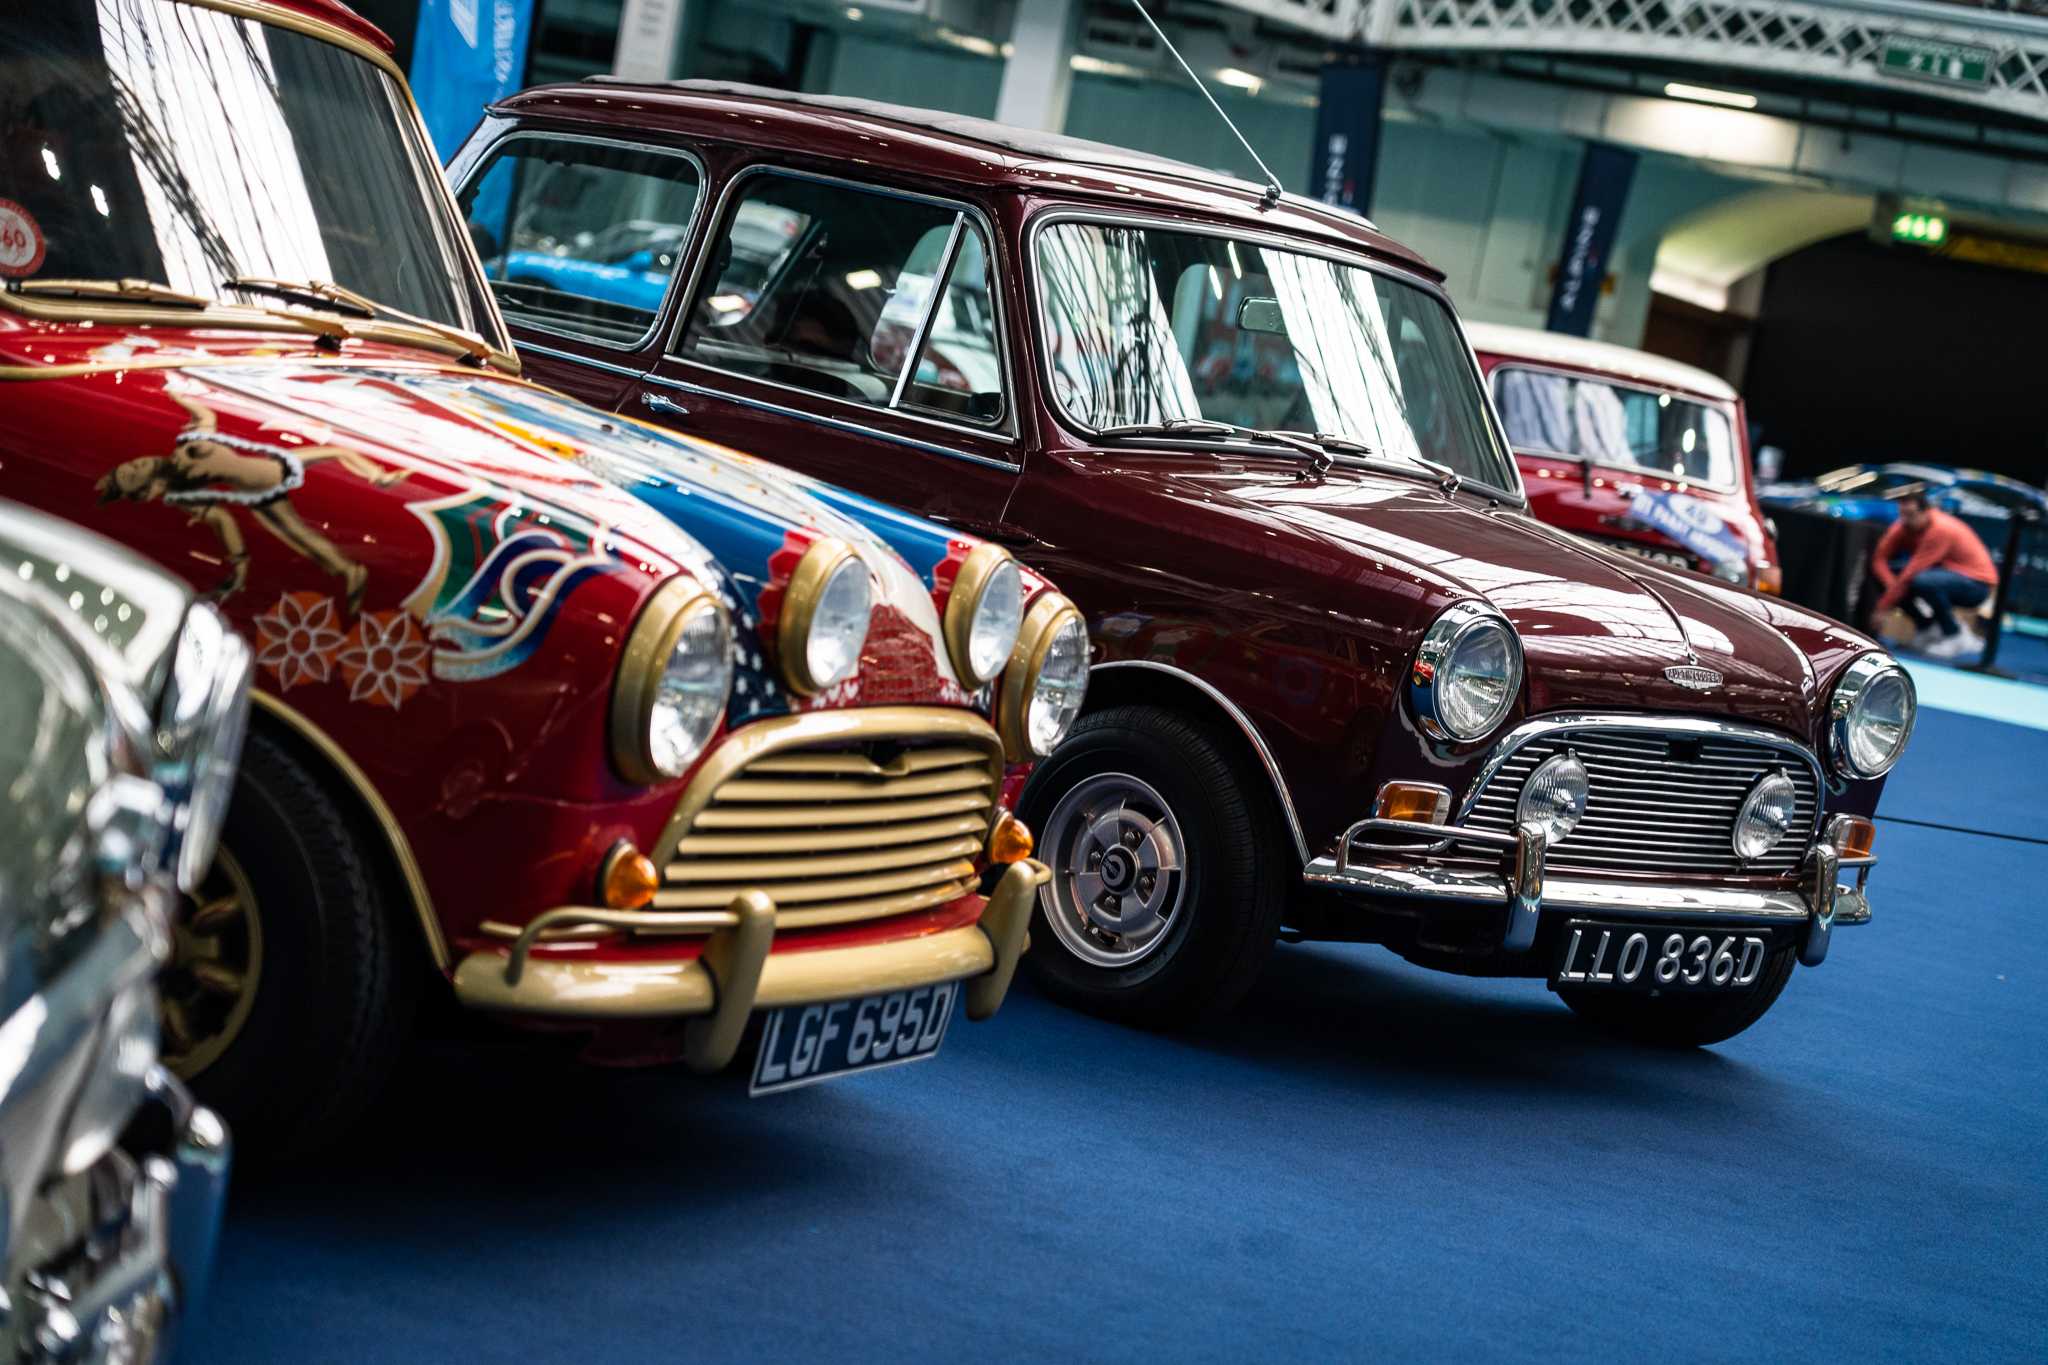 Radford Minis – once owned by music legends George Harrison, Paul McCartney and Ringo Starr